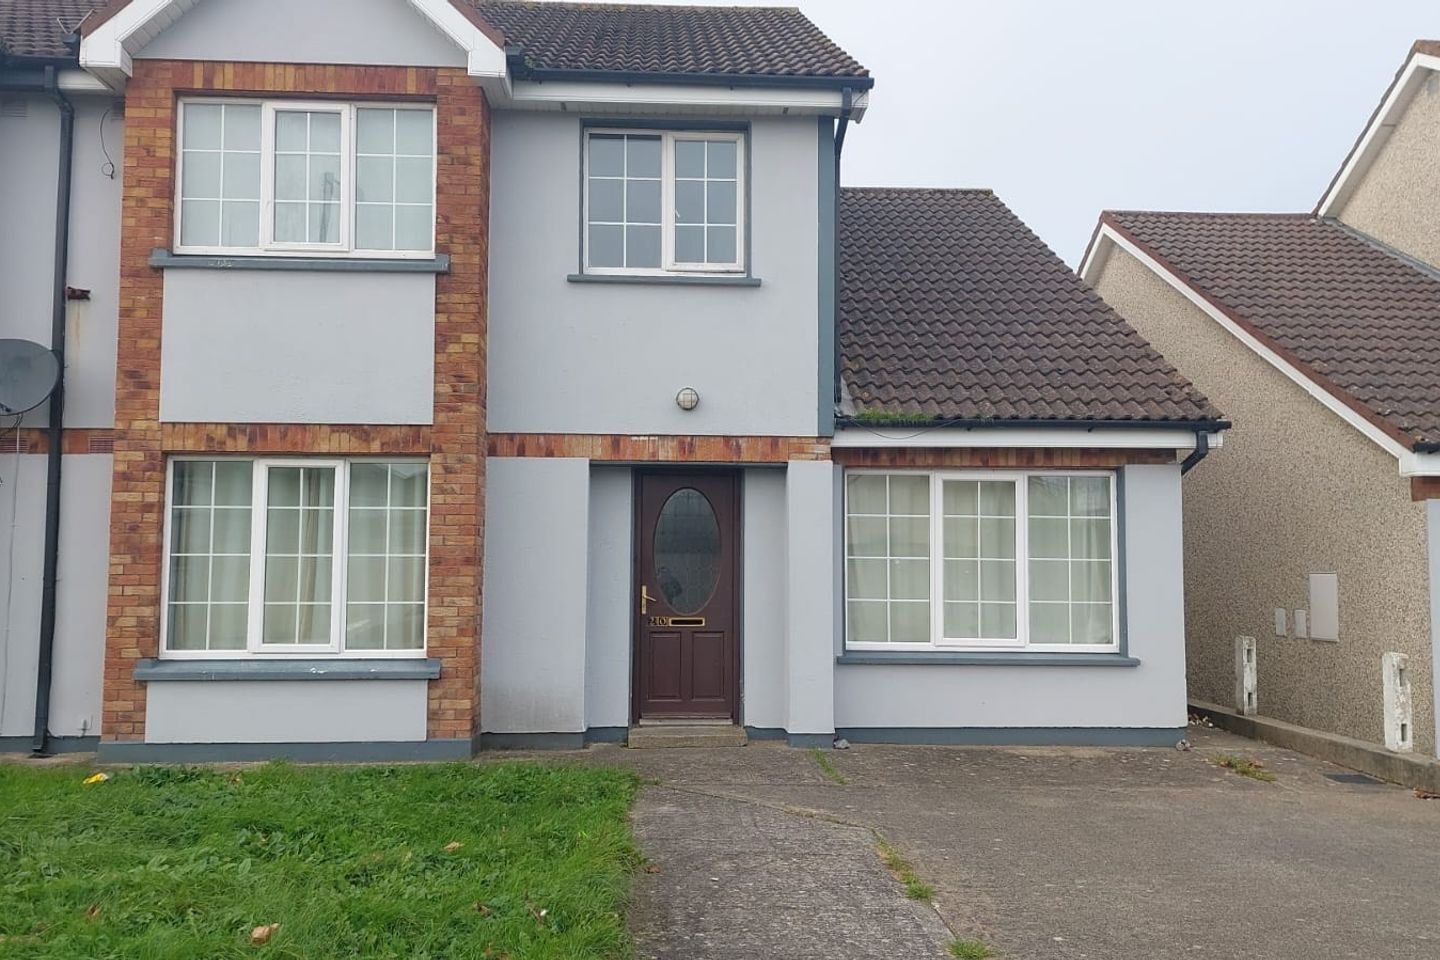 23 Briot Drive, Templars Hall, Waterford City, Co. Waterford, X91RKV7